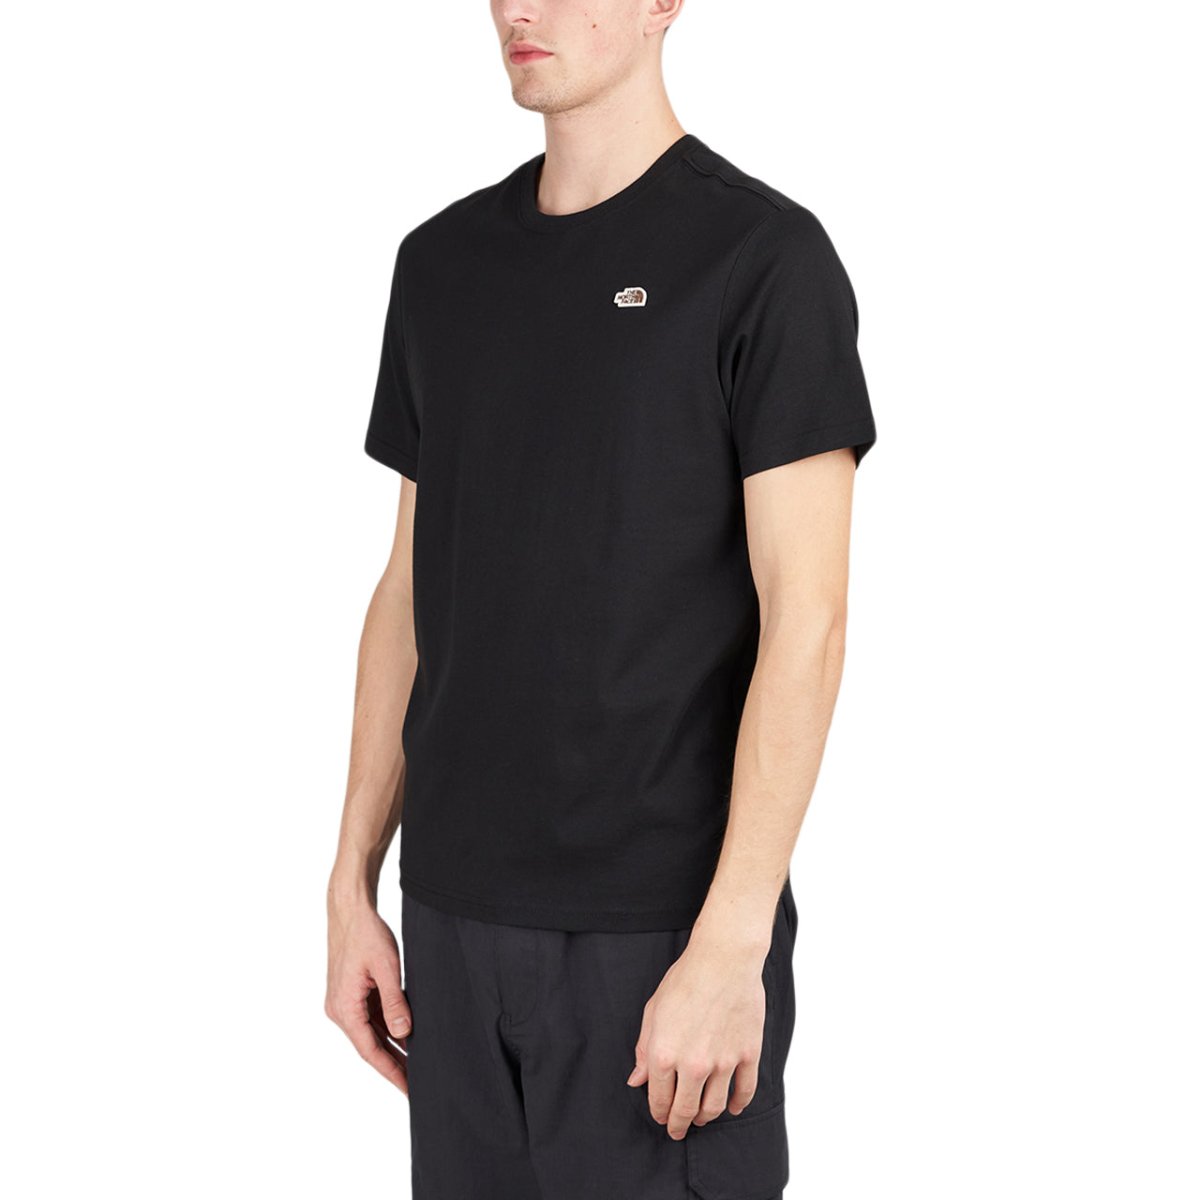 The North Face S/S Scrap Graphic Tee (Schwarz)  - Allike Store